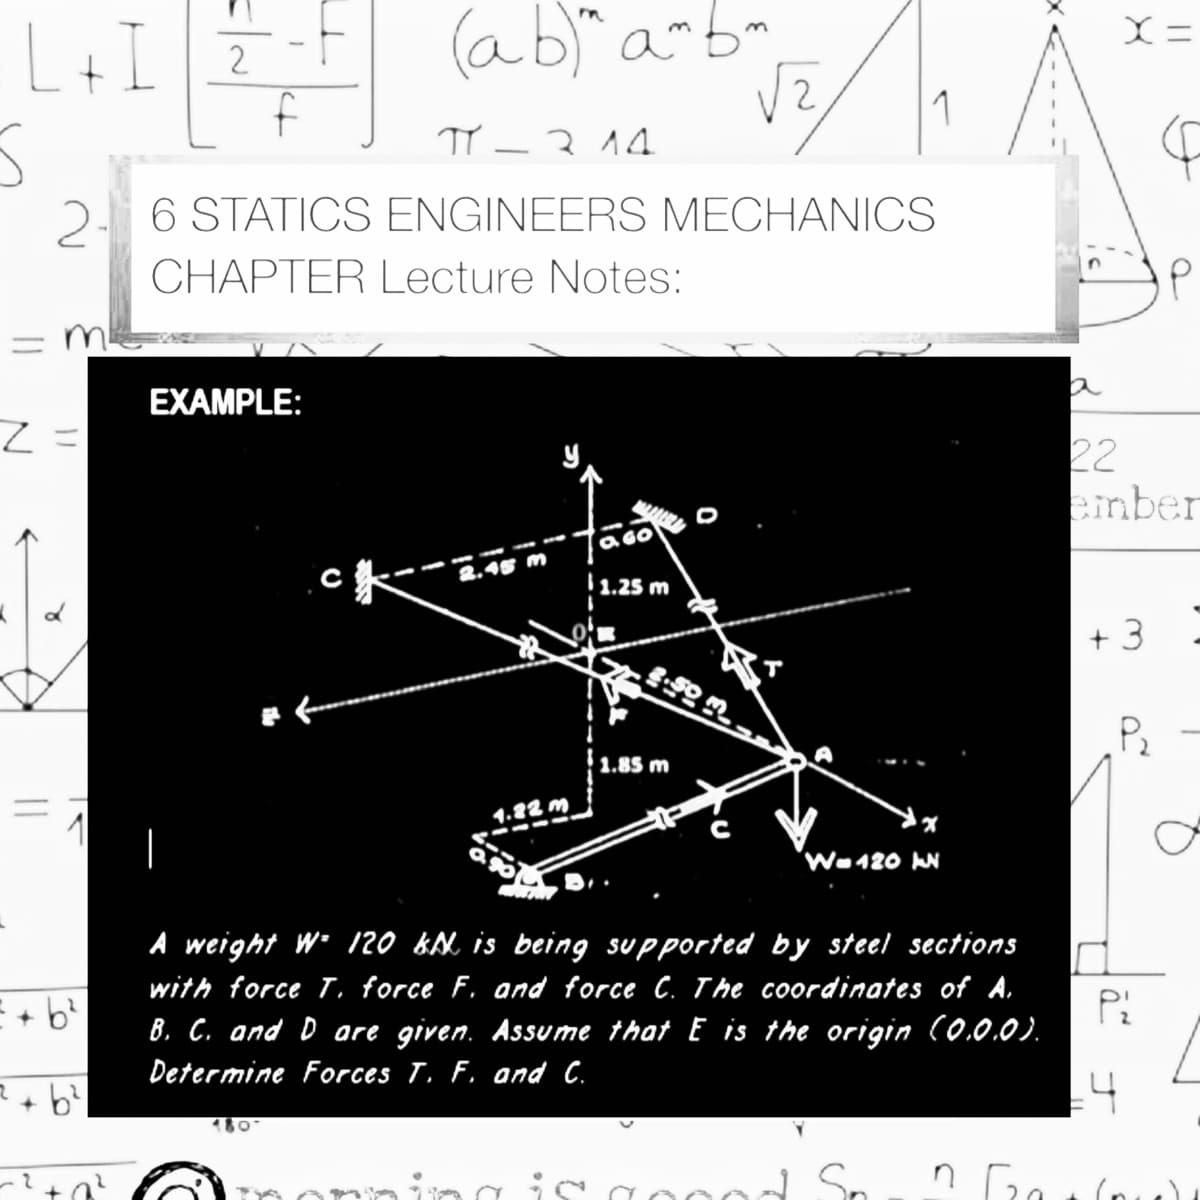 L+I 7
(ab)" a-bm
f
2
1
TY –314
-
2- 6 STATICS ENGINEERS MECHANICS
CHAPTER Lecture Notes:
= m
%3D
EXAMPLE:
22
einber
6O
3.45 m
1.25 m
+ 3
Pz
1.85 m
1
1.22 m
Wa120 IN
A weight W• 120 kM is being supported by steel sections
with force T. force
and force C. The coordinates of A.
B. C. and D are given. Assume that E is the origin (0.0.0).
Determine Forces T. F, and C.
